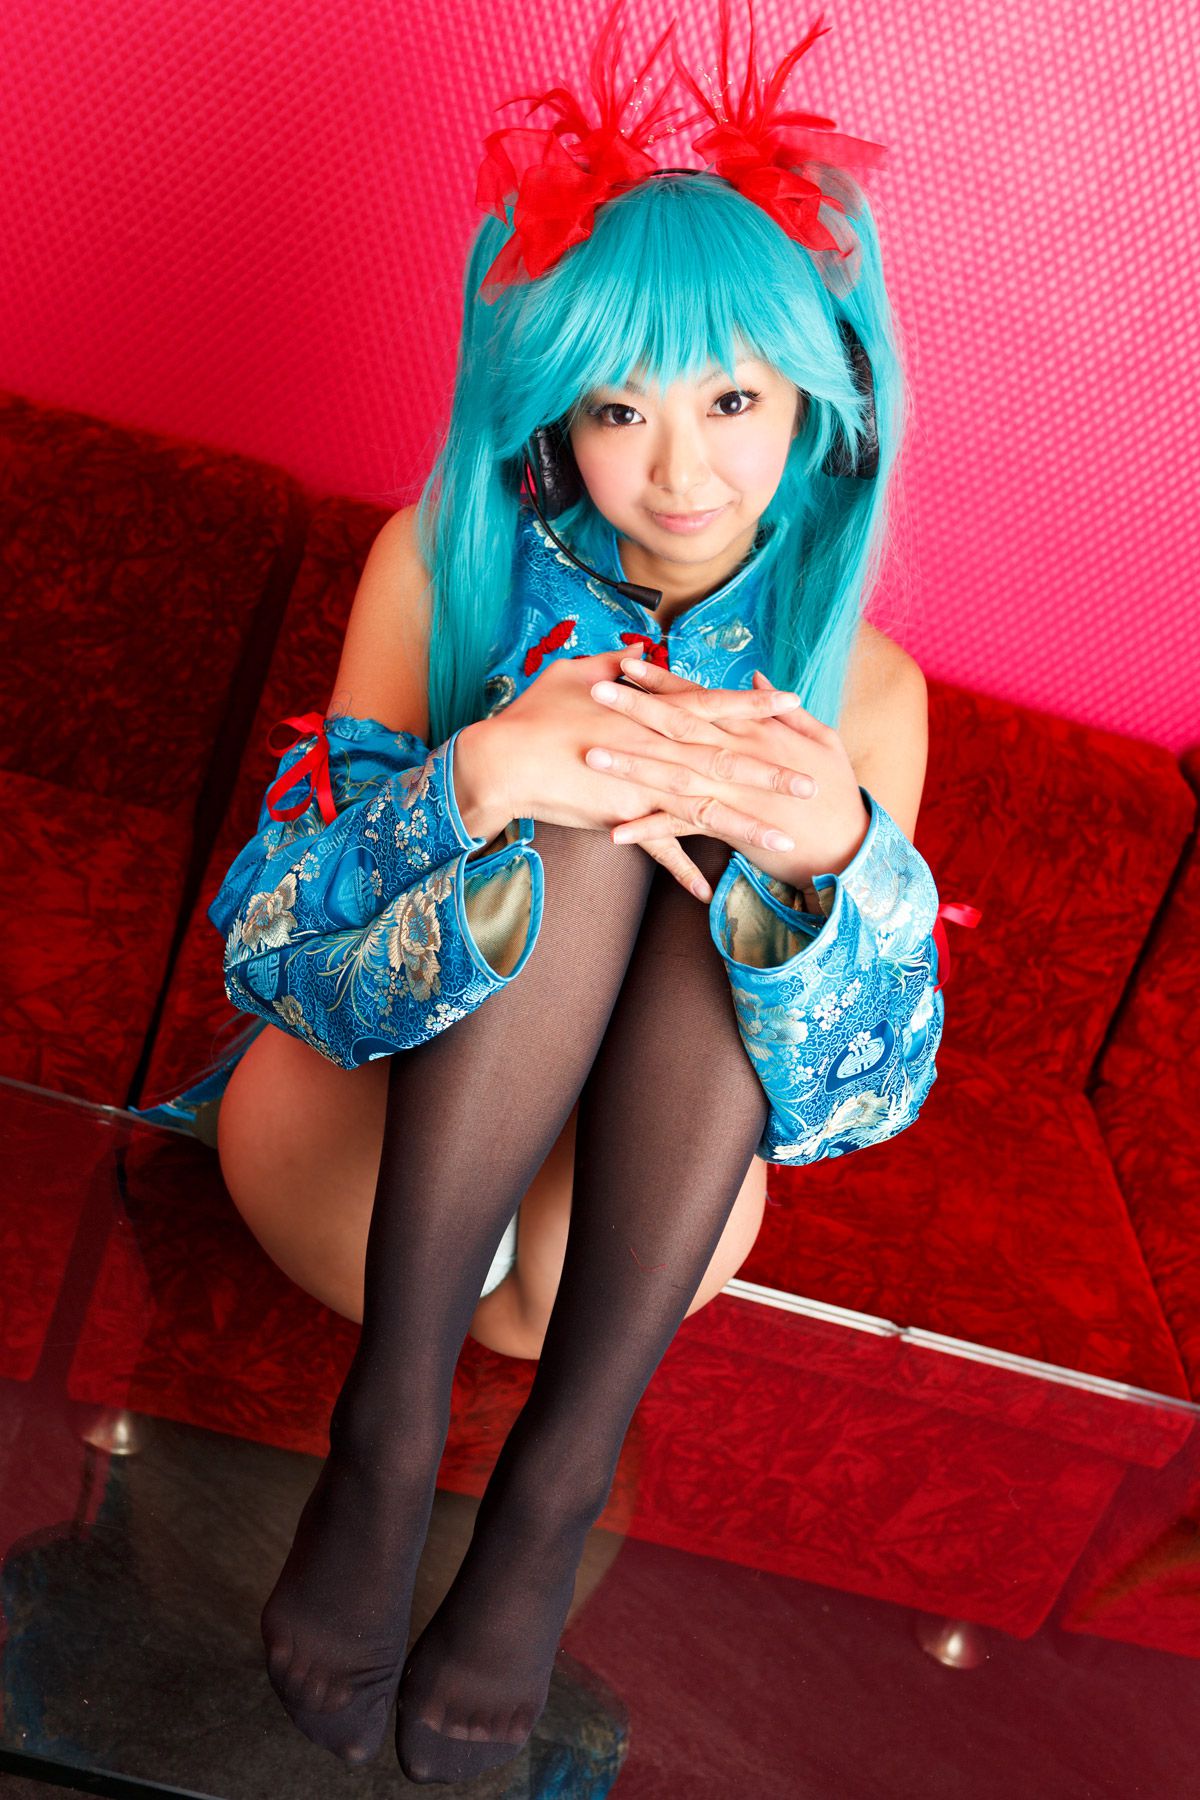 taotuhome[Cosplay] Necoco as Hatsune Miku from Vocaloid 套图第60张